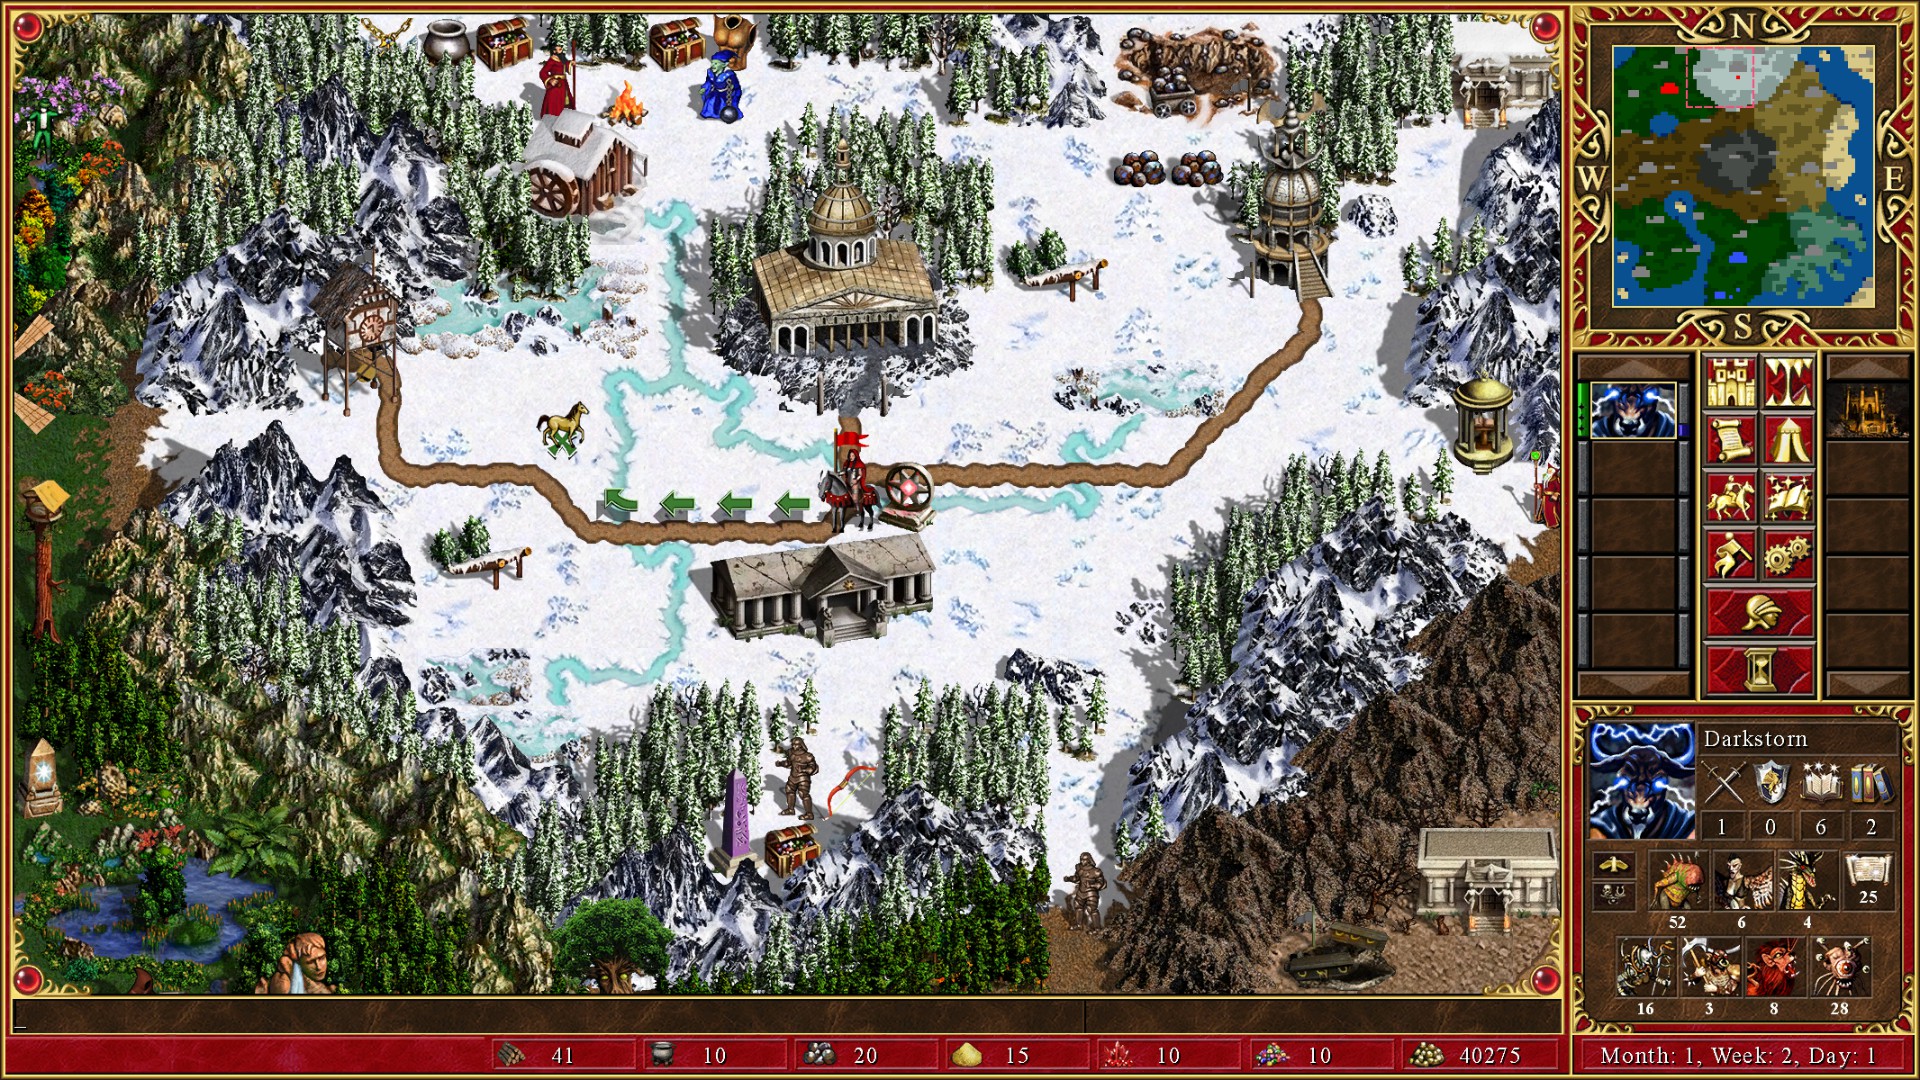 Retro Video Games That Stand Up - Heroes of Might & Magic III